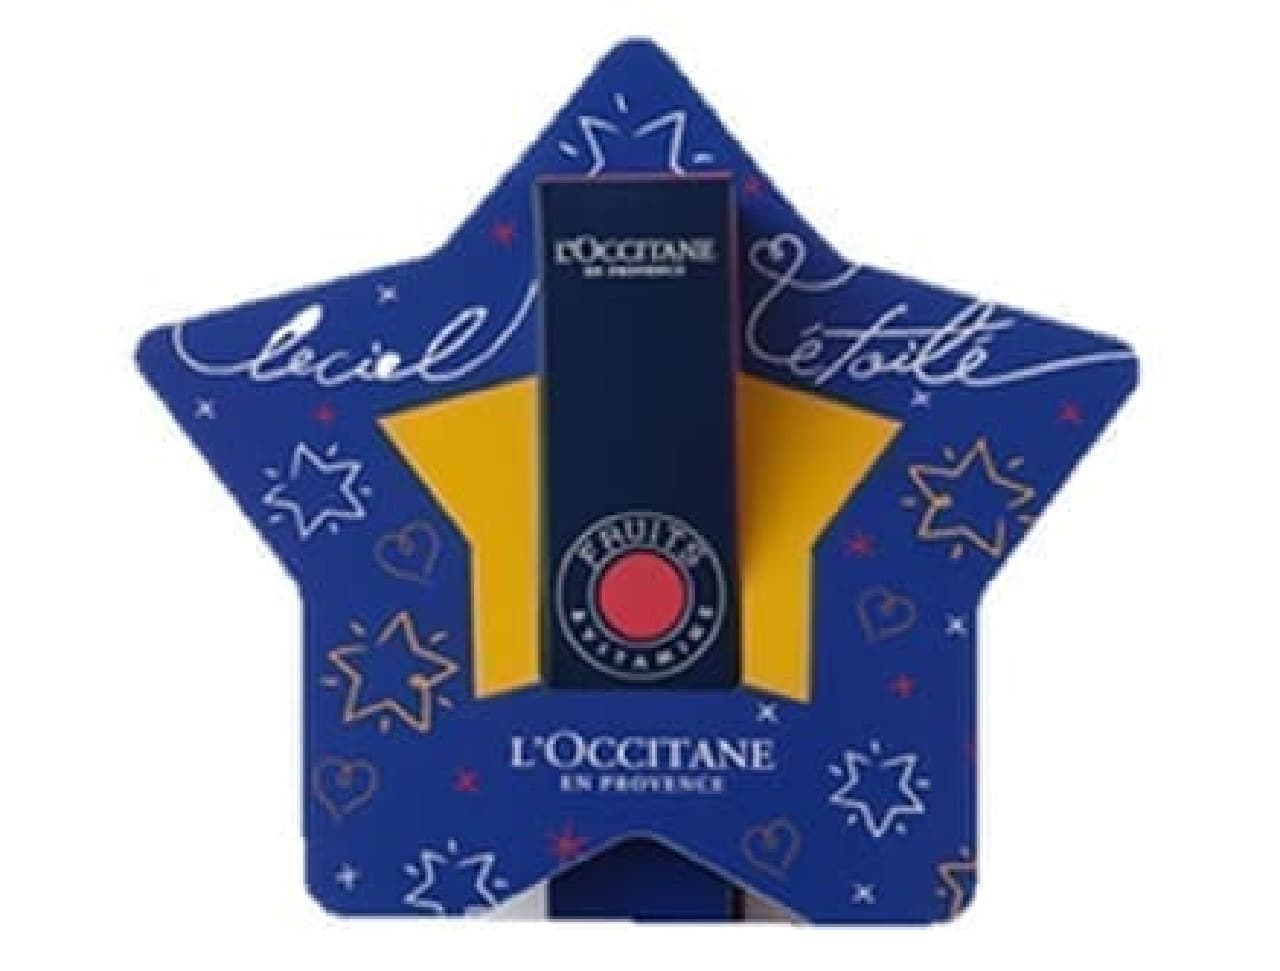 L'Occitane "Delicious & Fruity Intense Lipstick" Limited Package